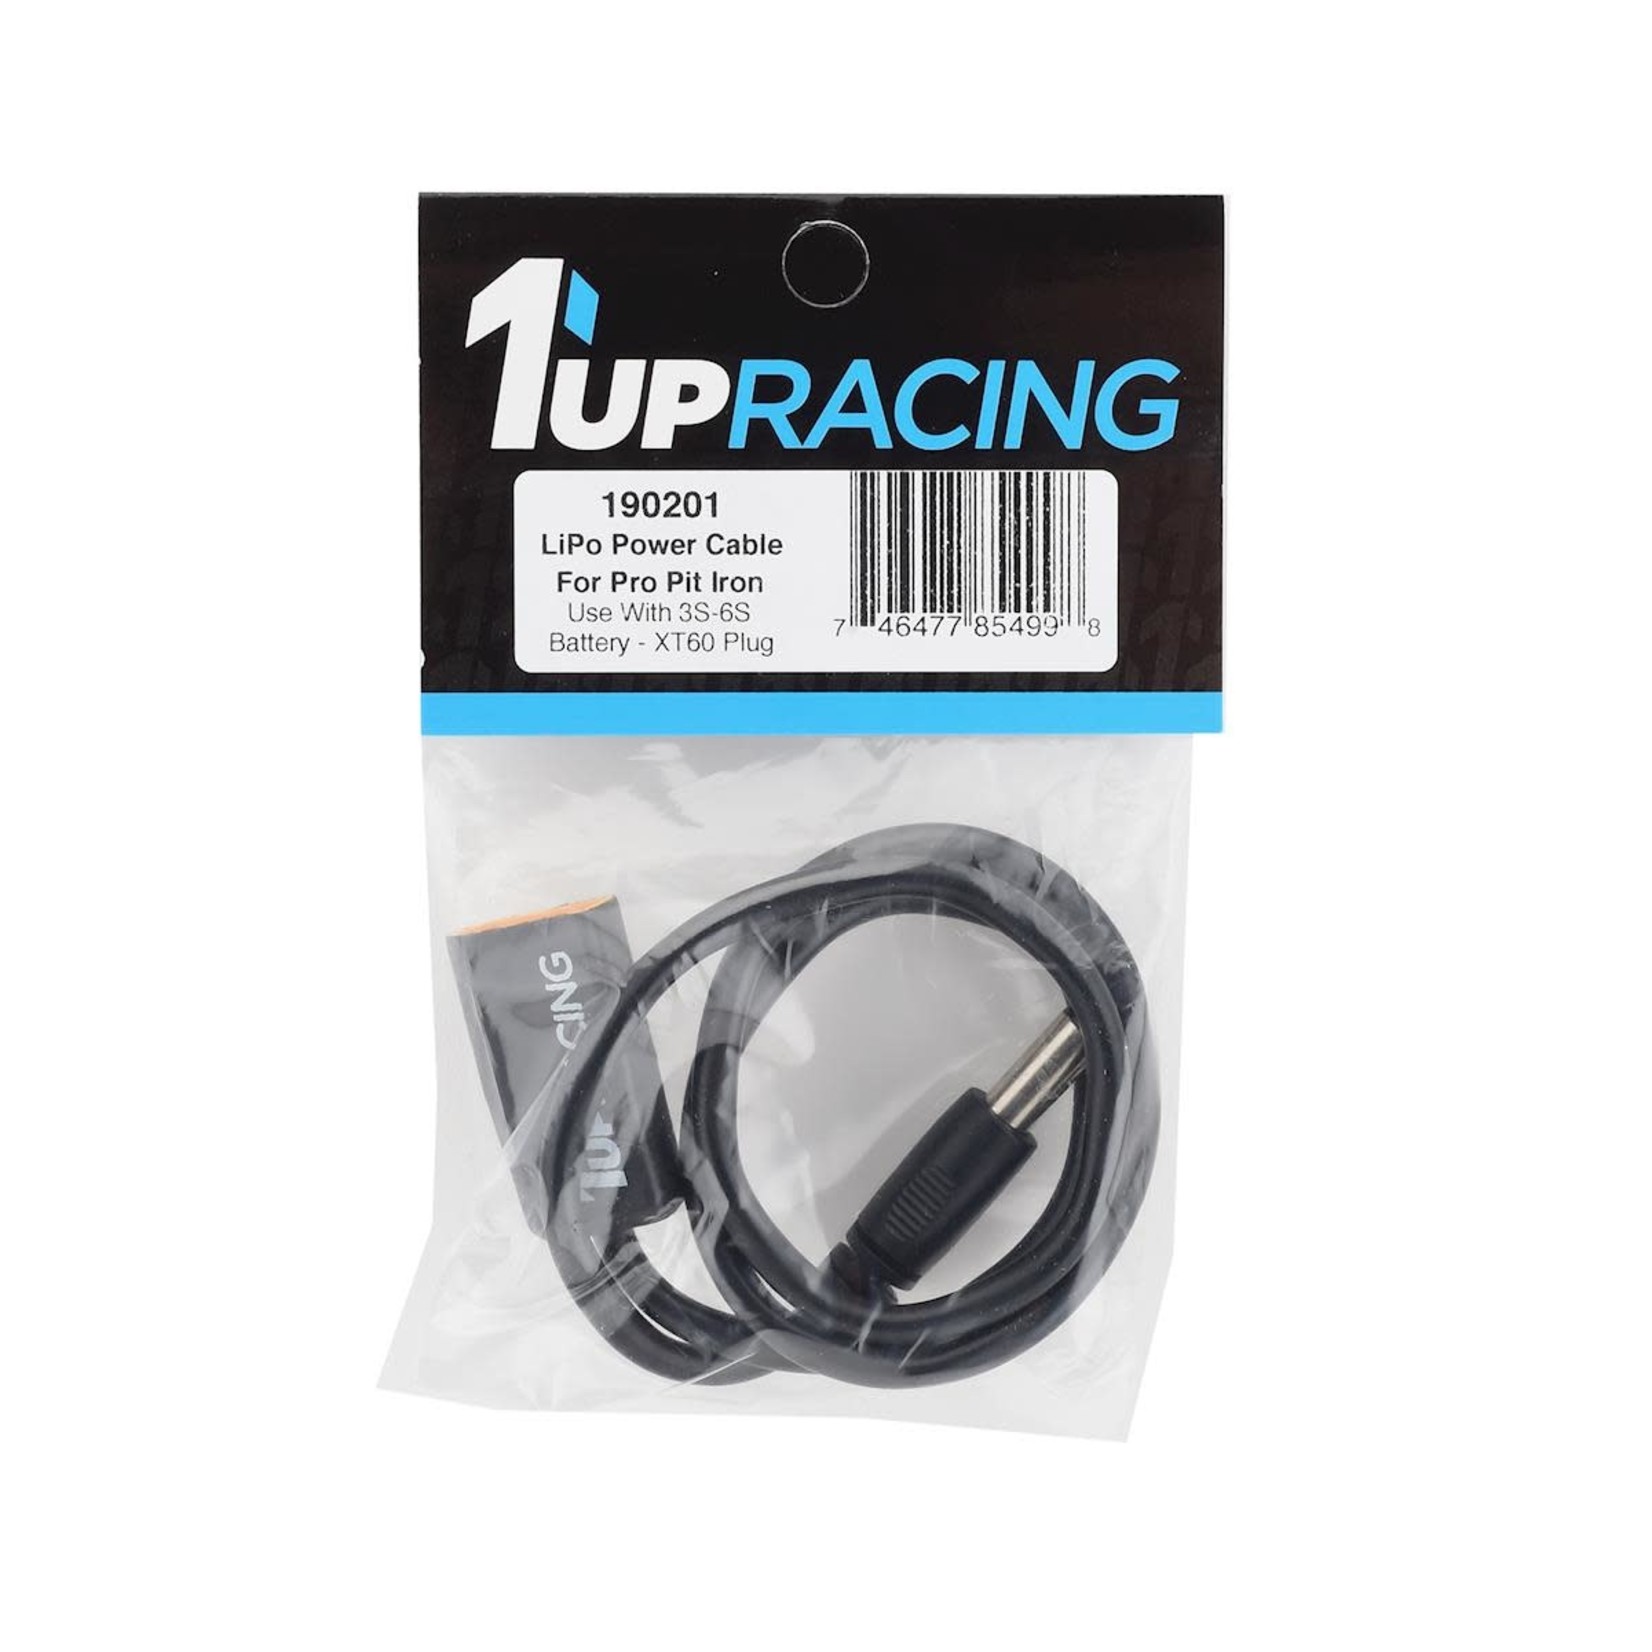 1UP Racing 1UP Racing Pro Pit Soldering Iron DC Power Cable w/XT60 Plug (3S-6S) #190201